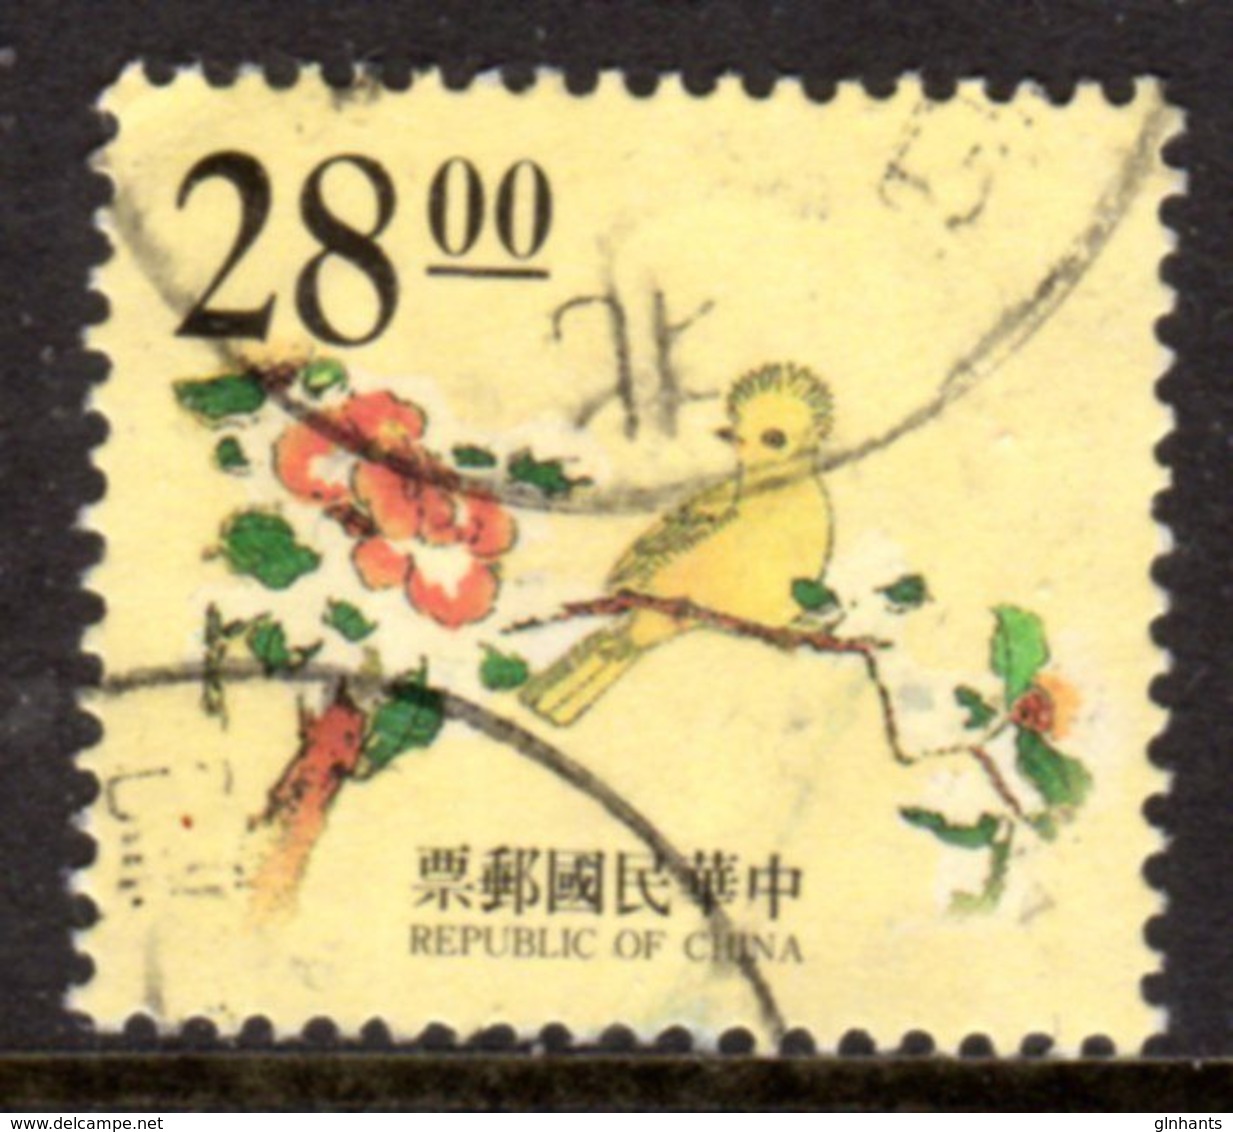 TAIWAN ROC - 1995 ENGRAVINGS YELLOW BIRDS $28 STAMP FINE USED SG 2267 - Oblitérés